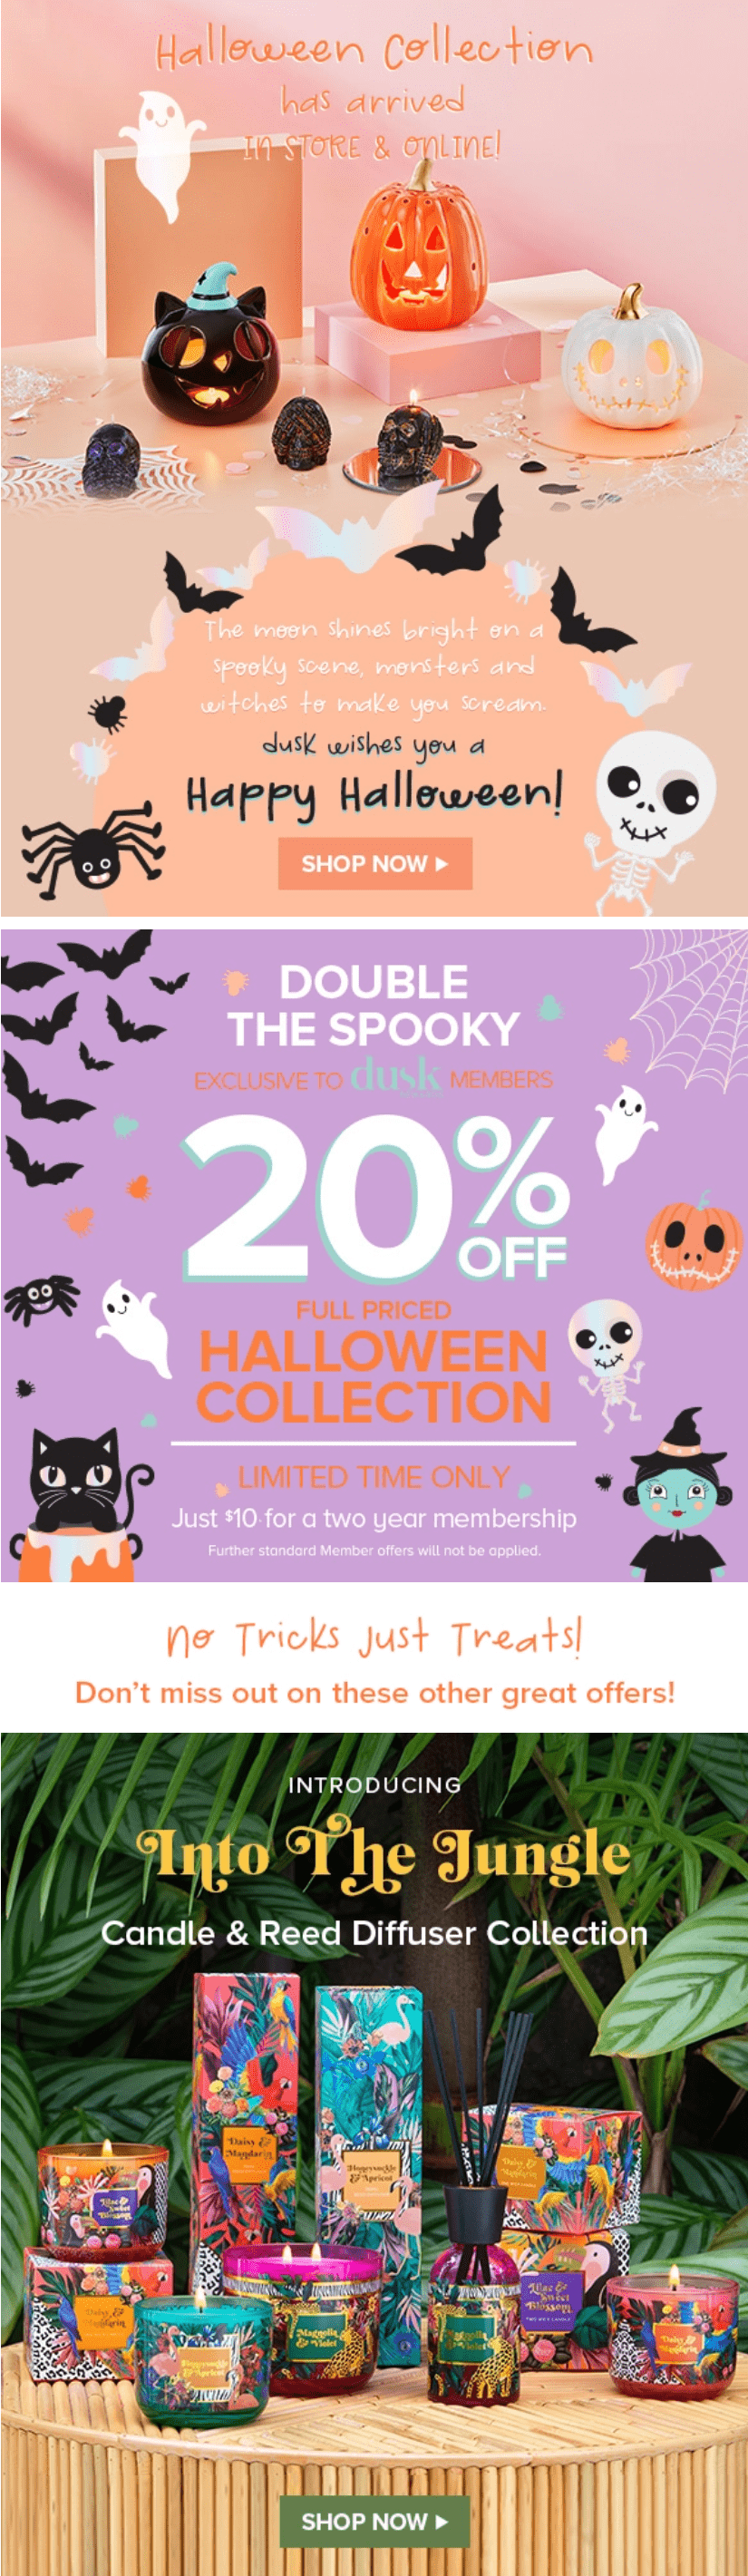 Halloween email template example